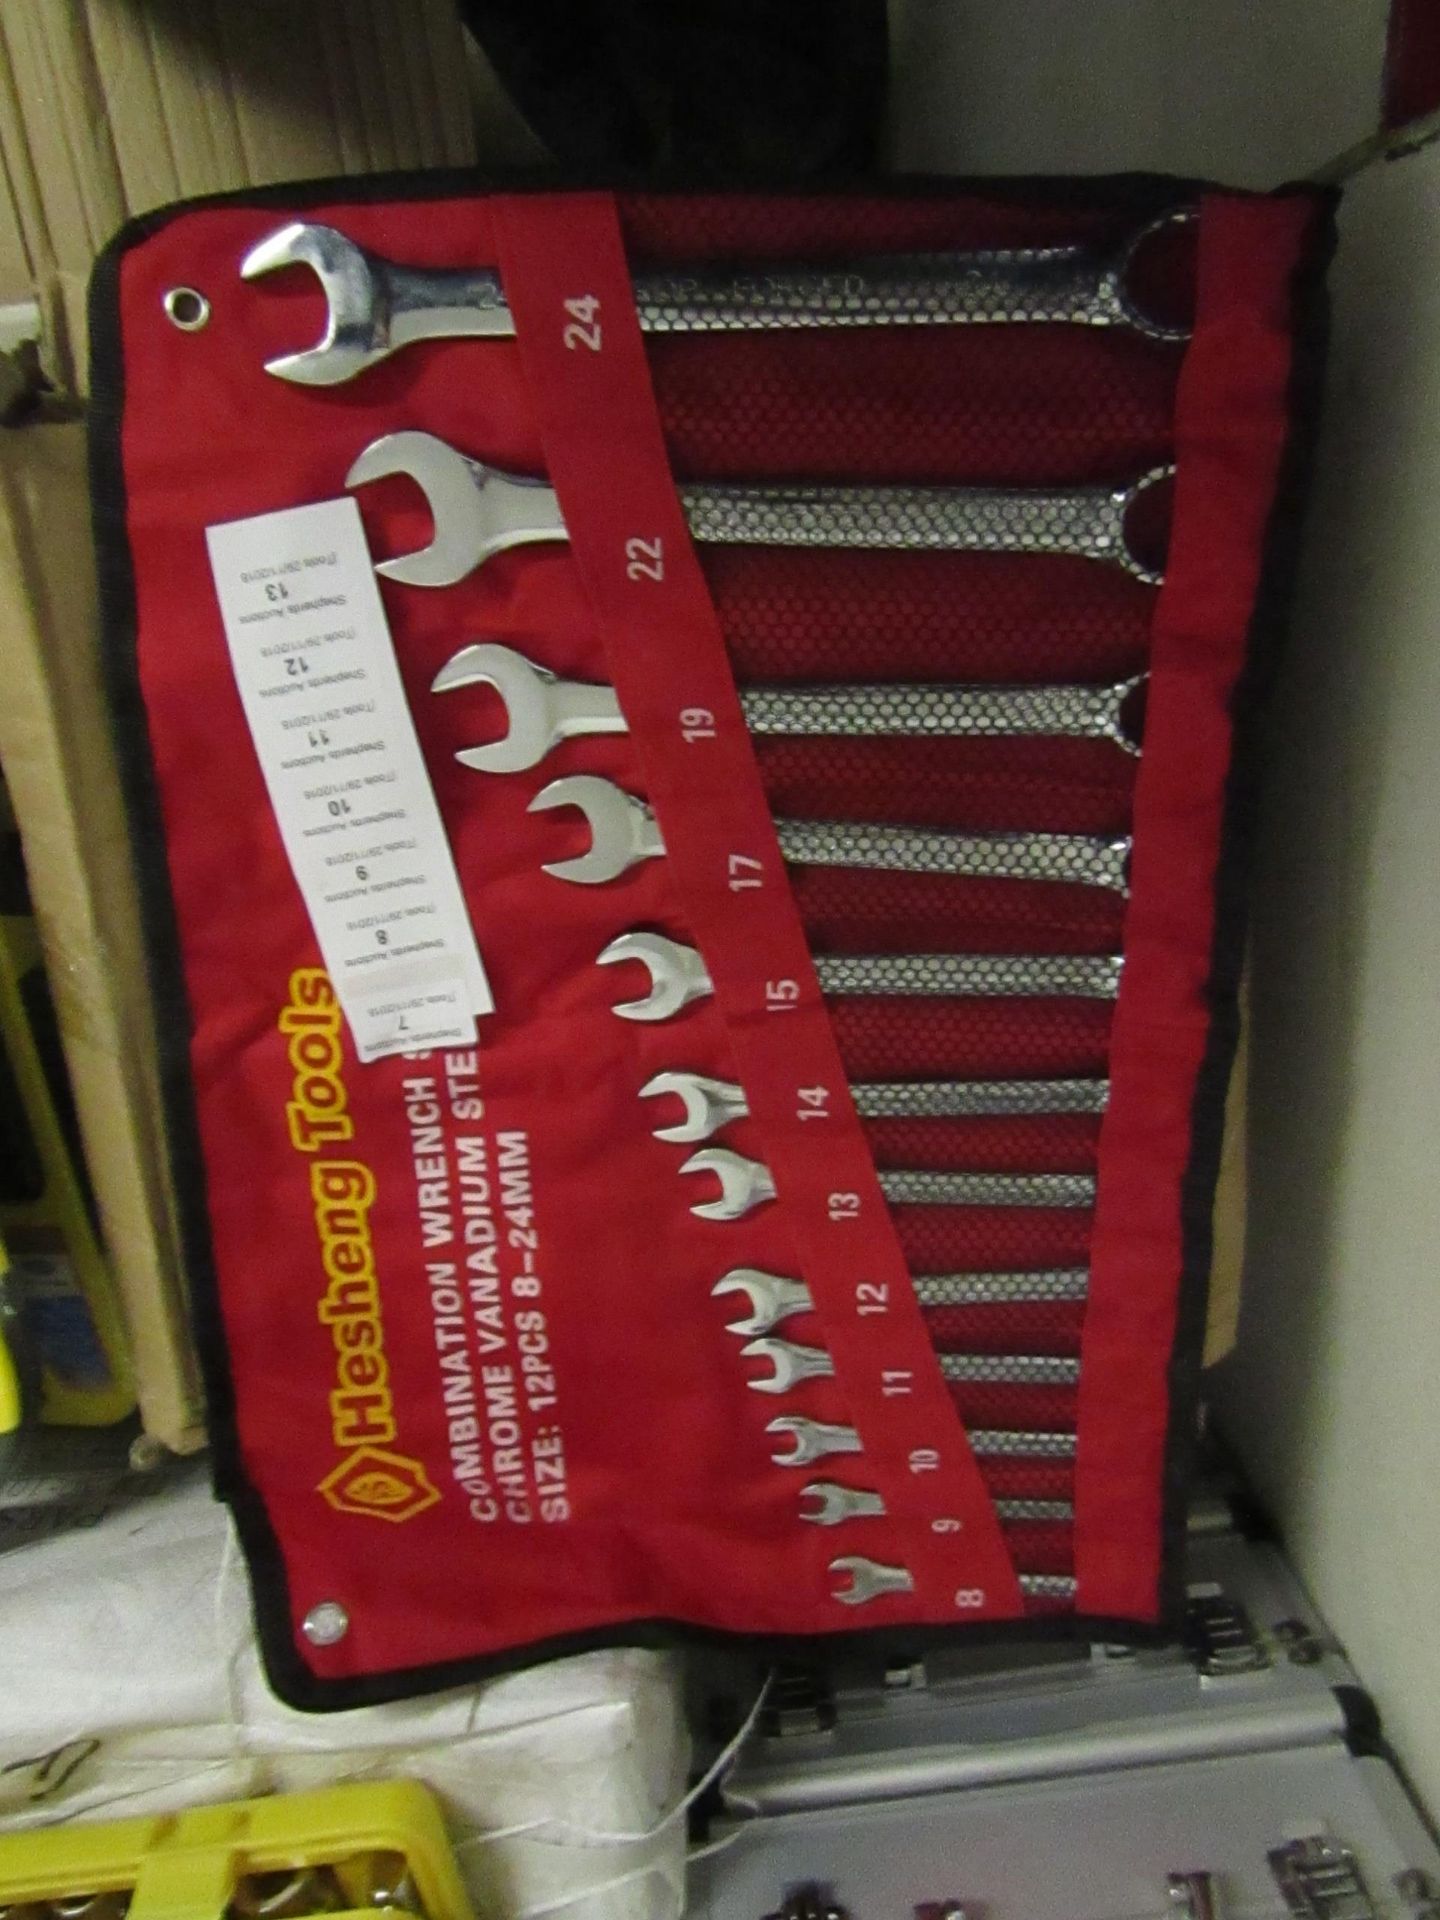 Hesheng tools set of 12 combination spaners, new in carry roll